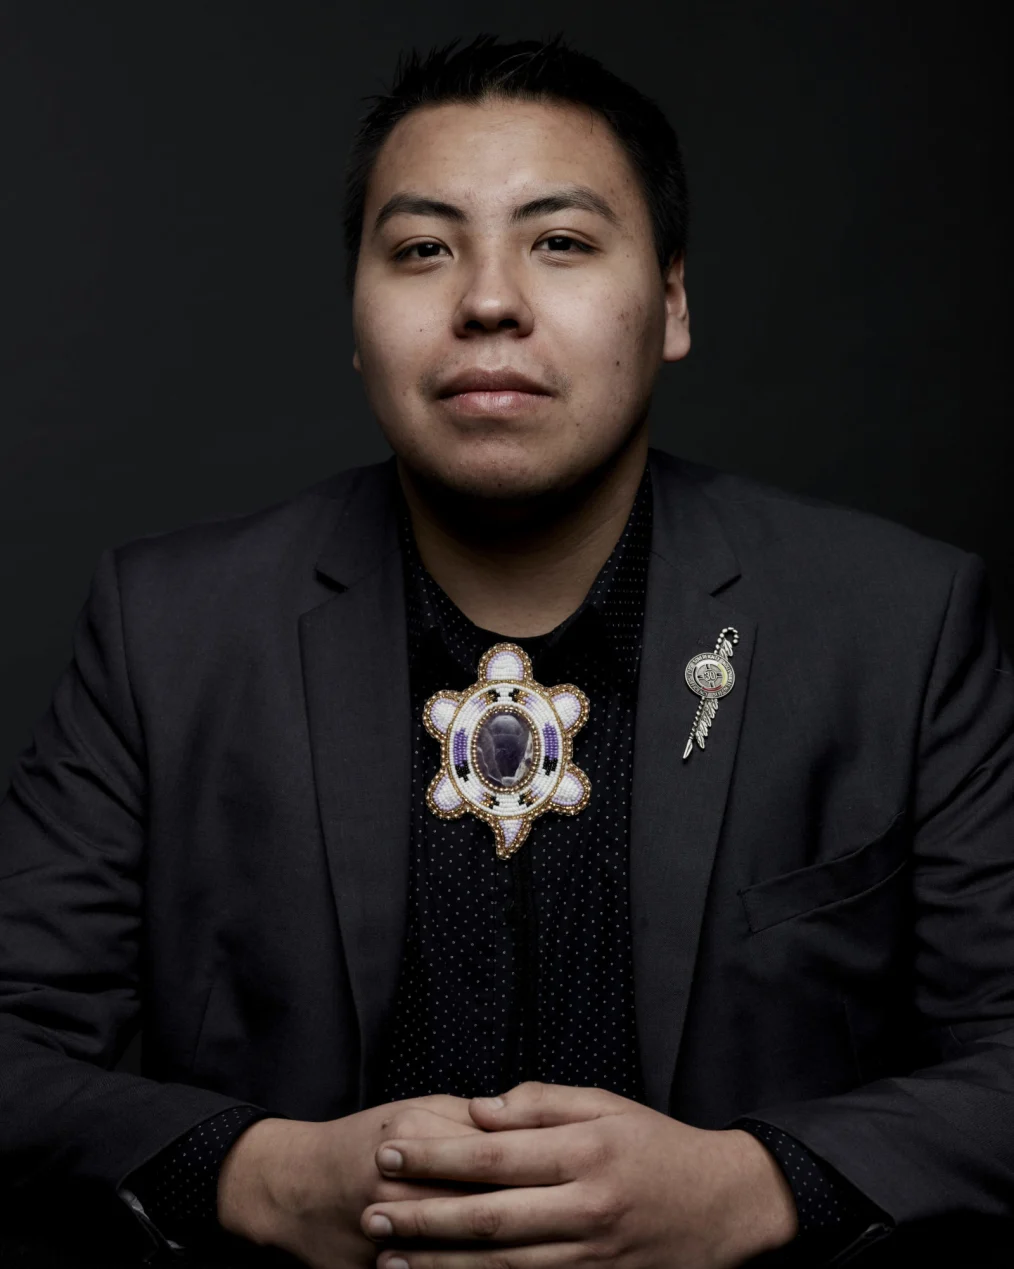 A Native American man wearing a black suit looks directly at the camera, his hands clasped in front of him. He wears an intricately beaded brooch and a lapel pin.